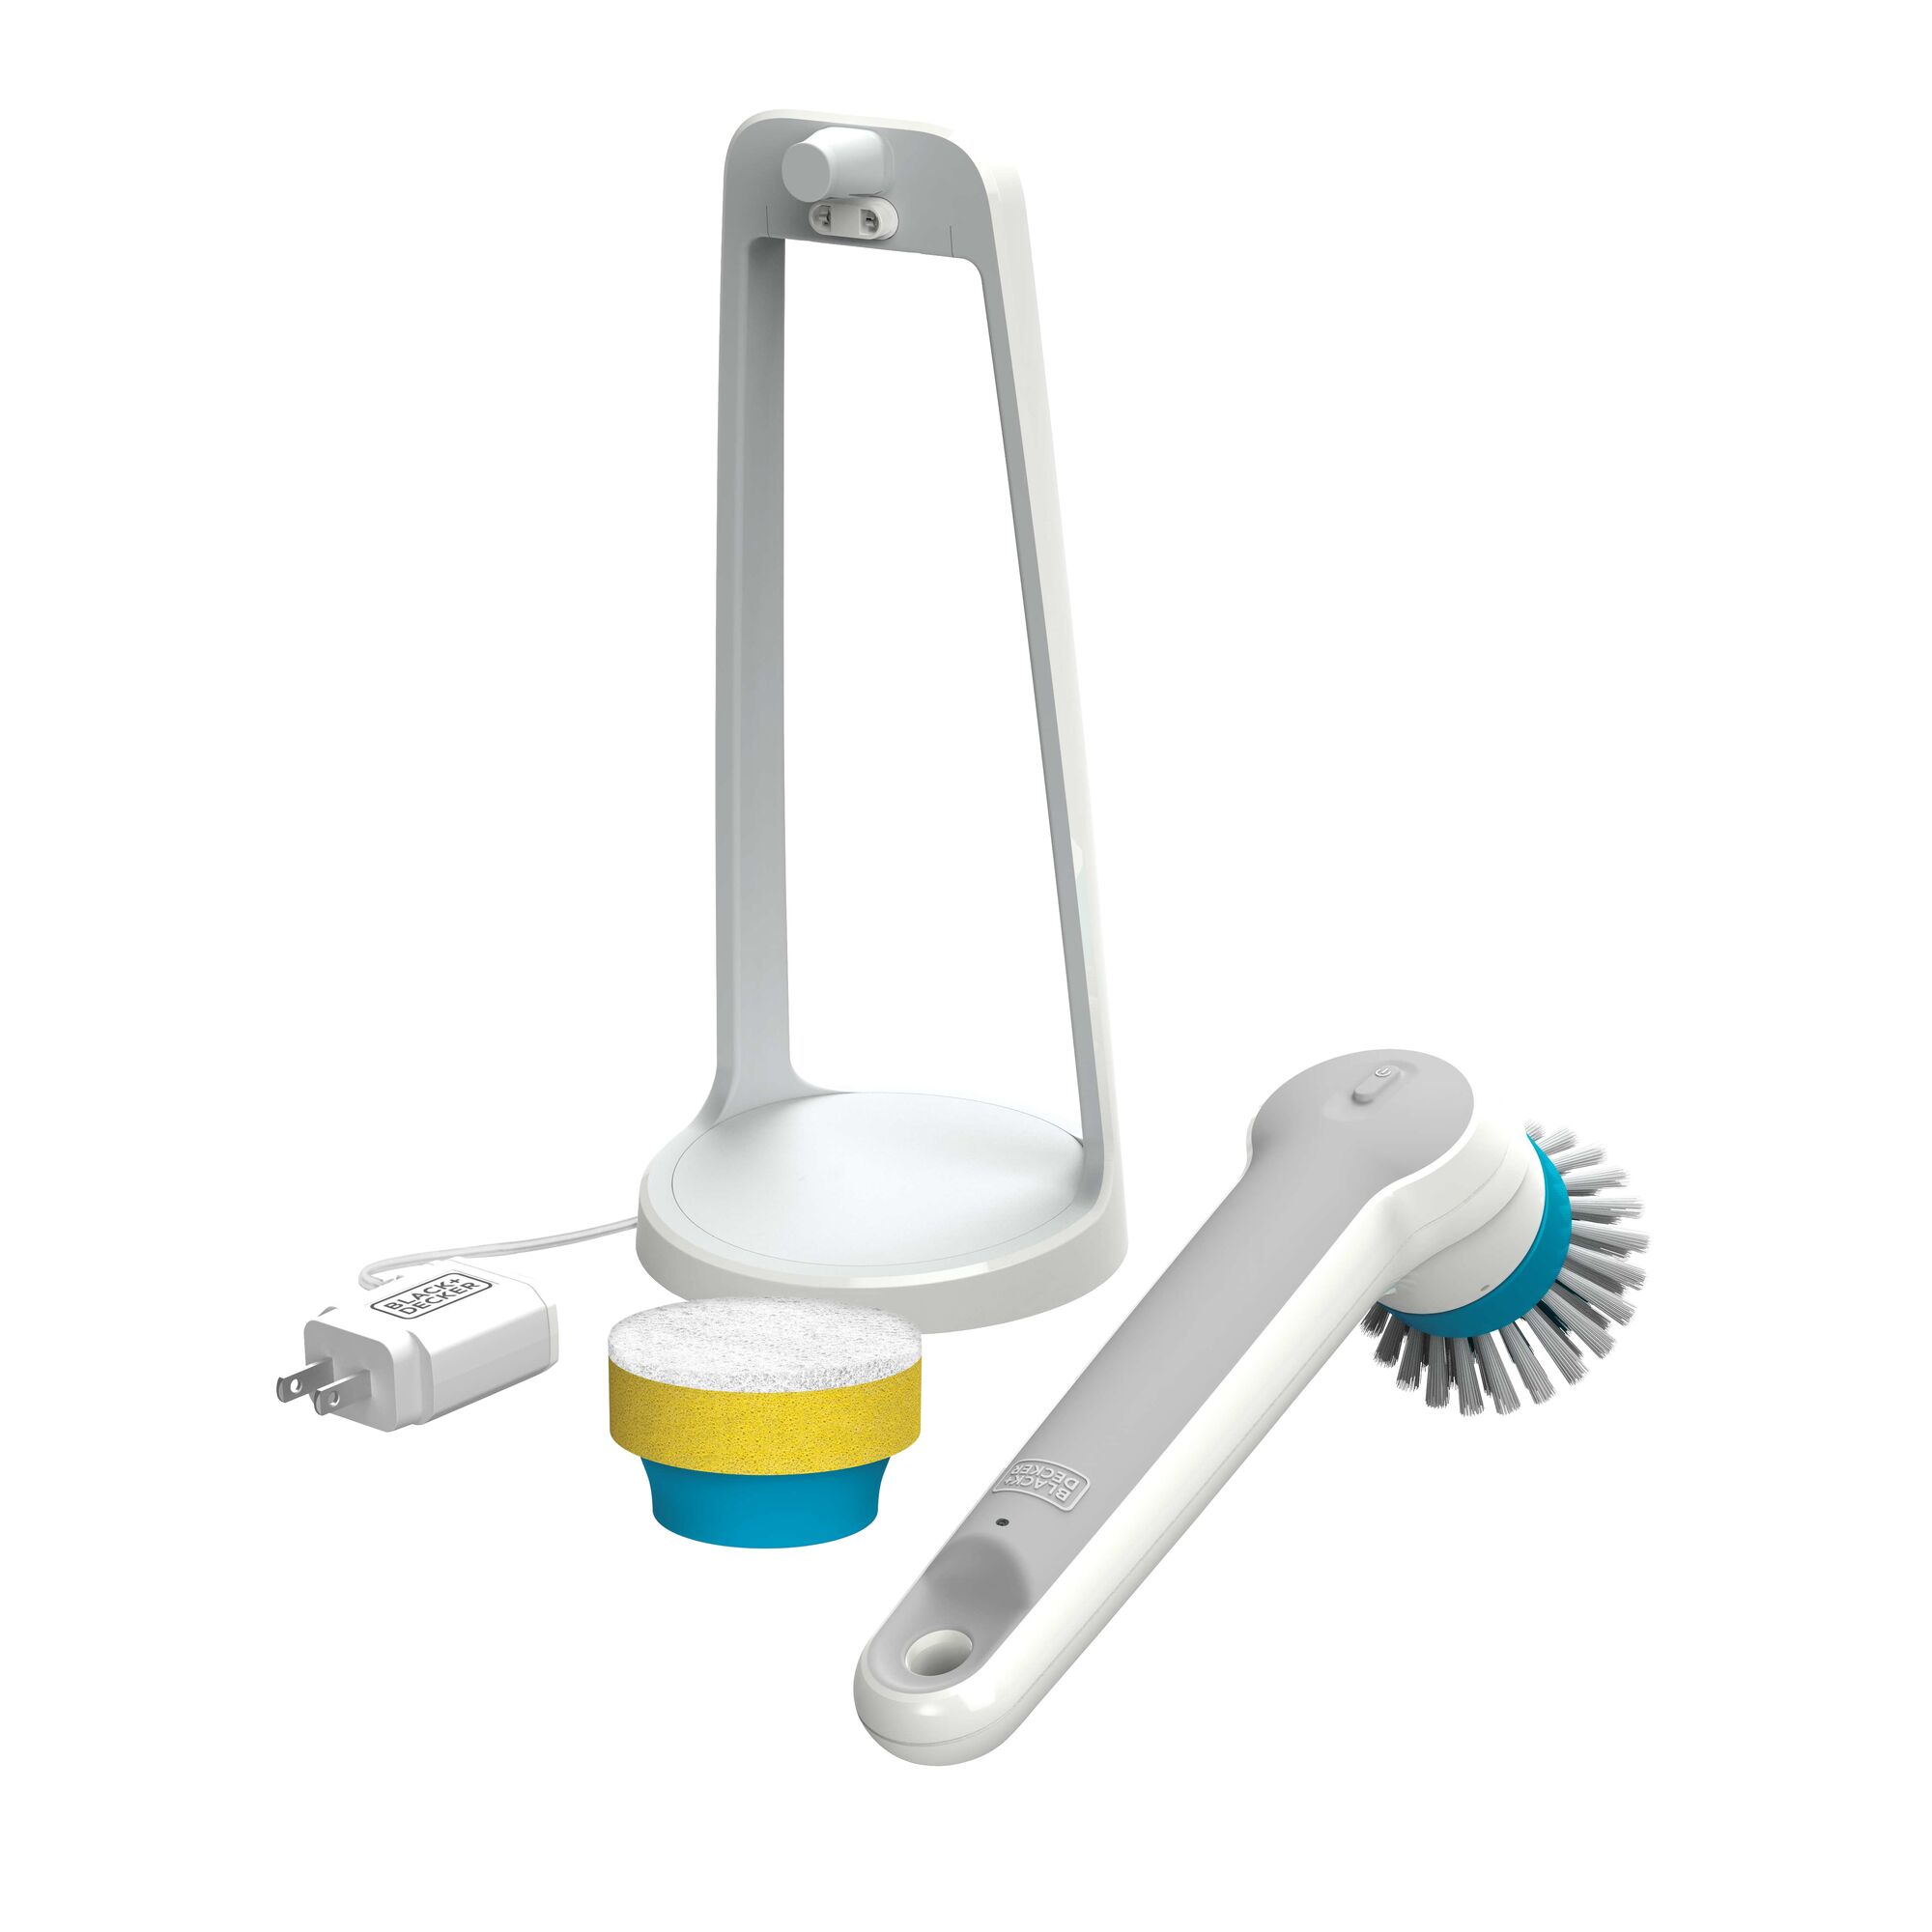 Grime buster Pro Rechargeable Powered Scrubber kit.